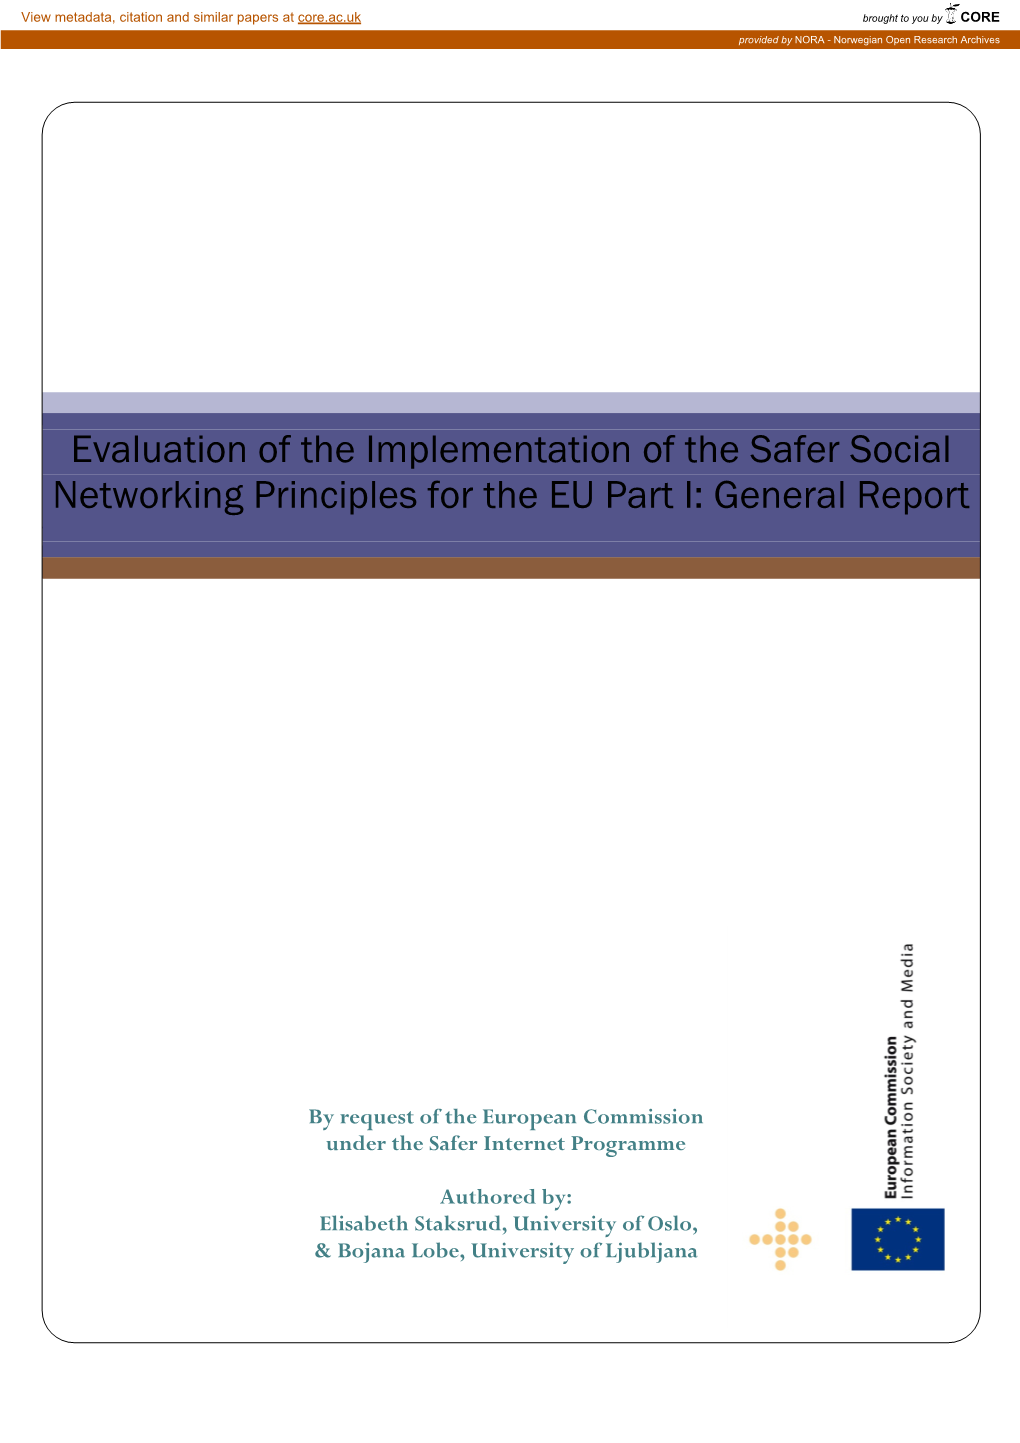 Evaluation of the Implementation of the Safer Social Networking Principles for the EU Part I: General Report